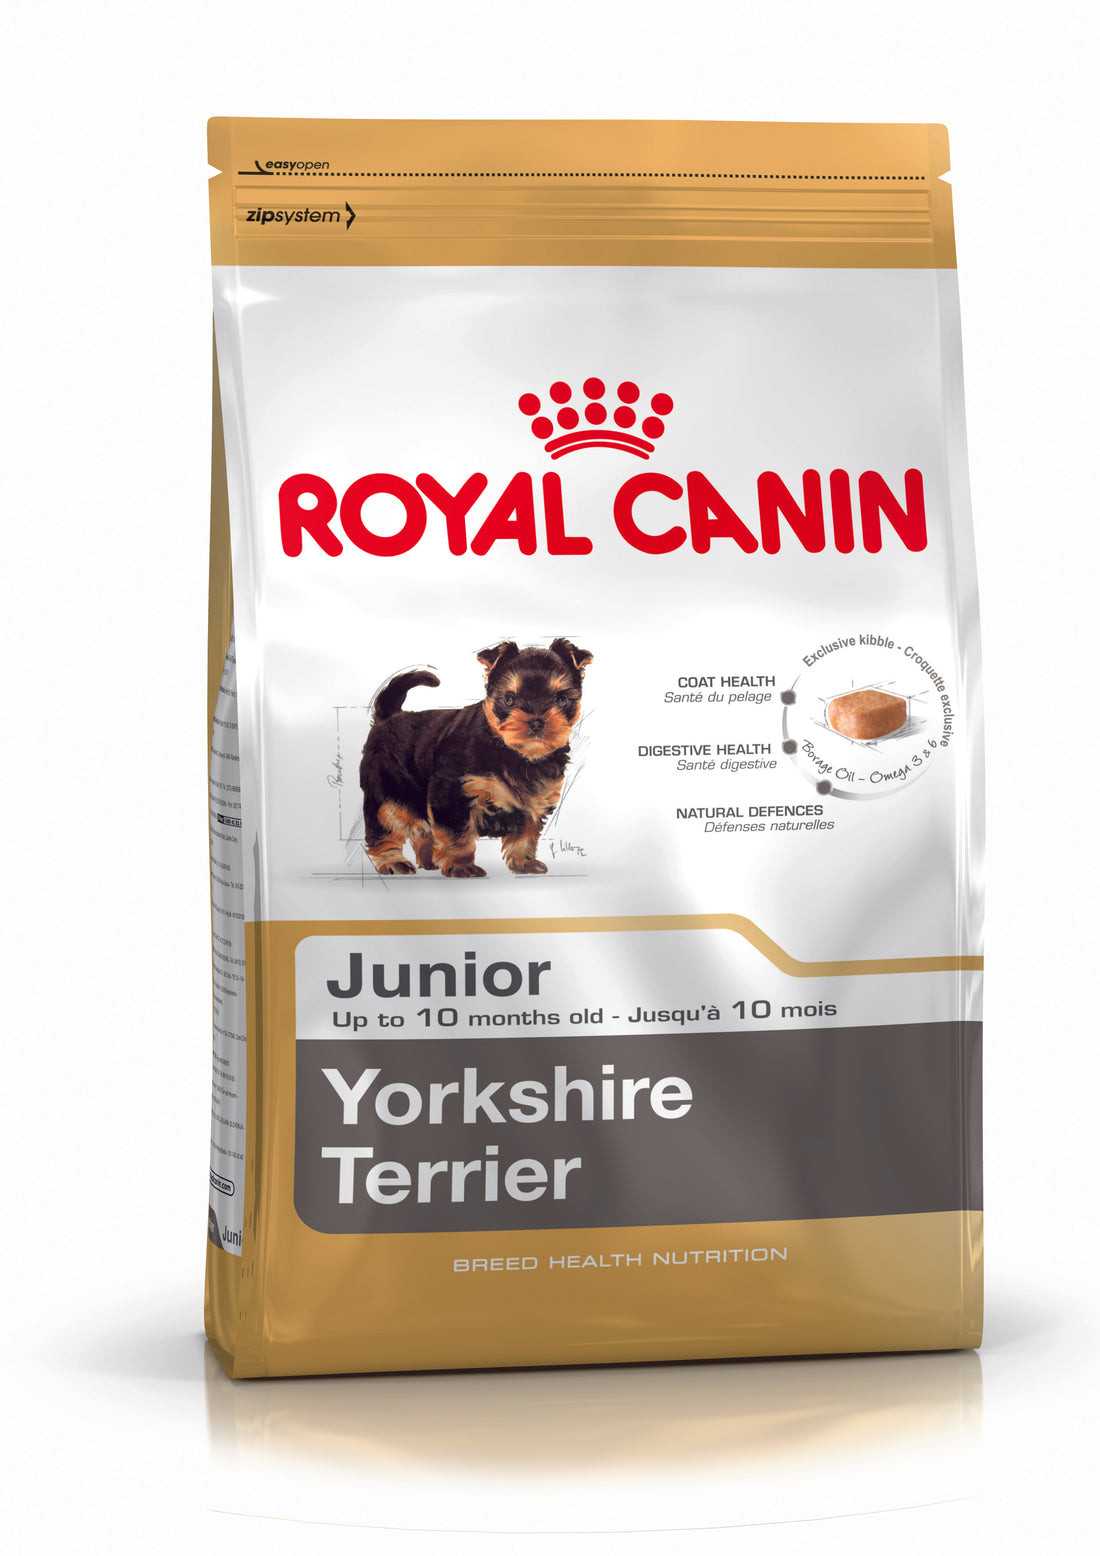 Royal Canin-Yorkshire Terrier Puppy Dog Food 1.5Kg